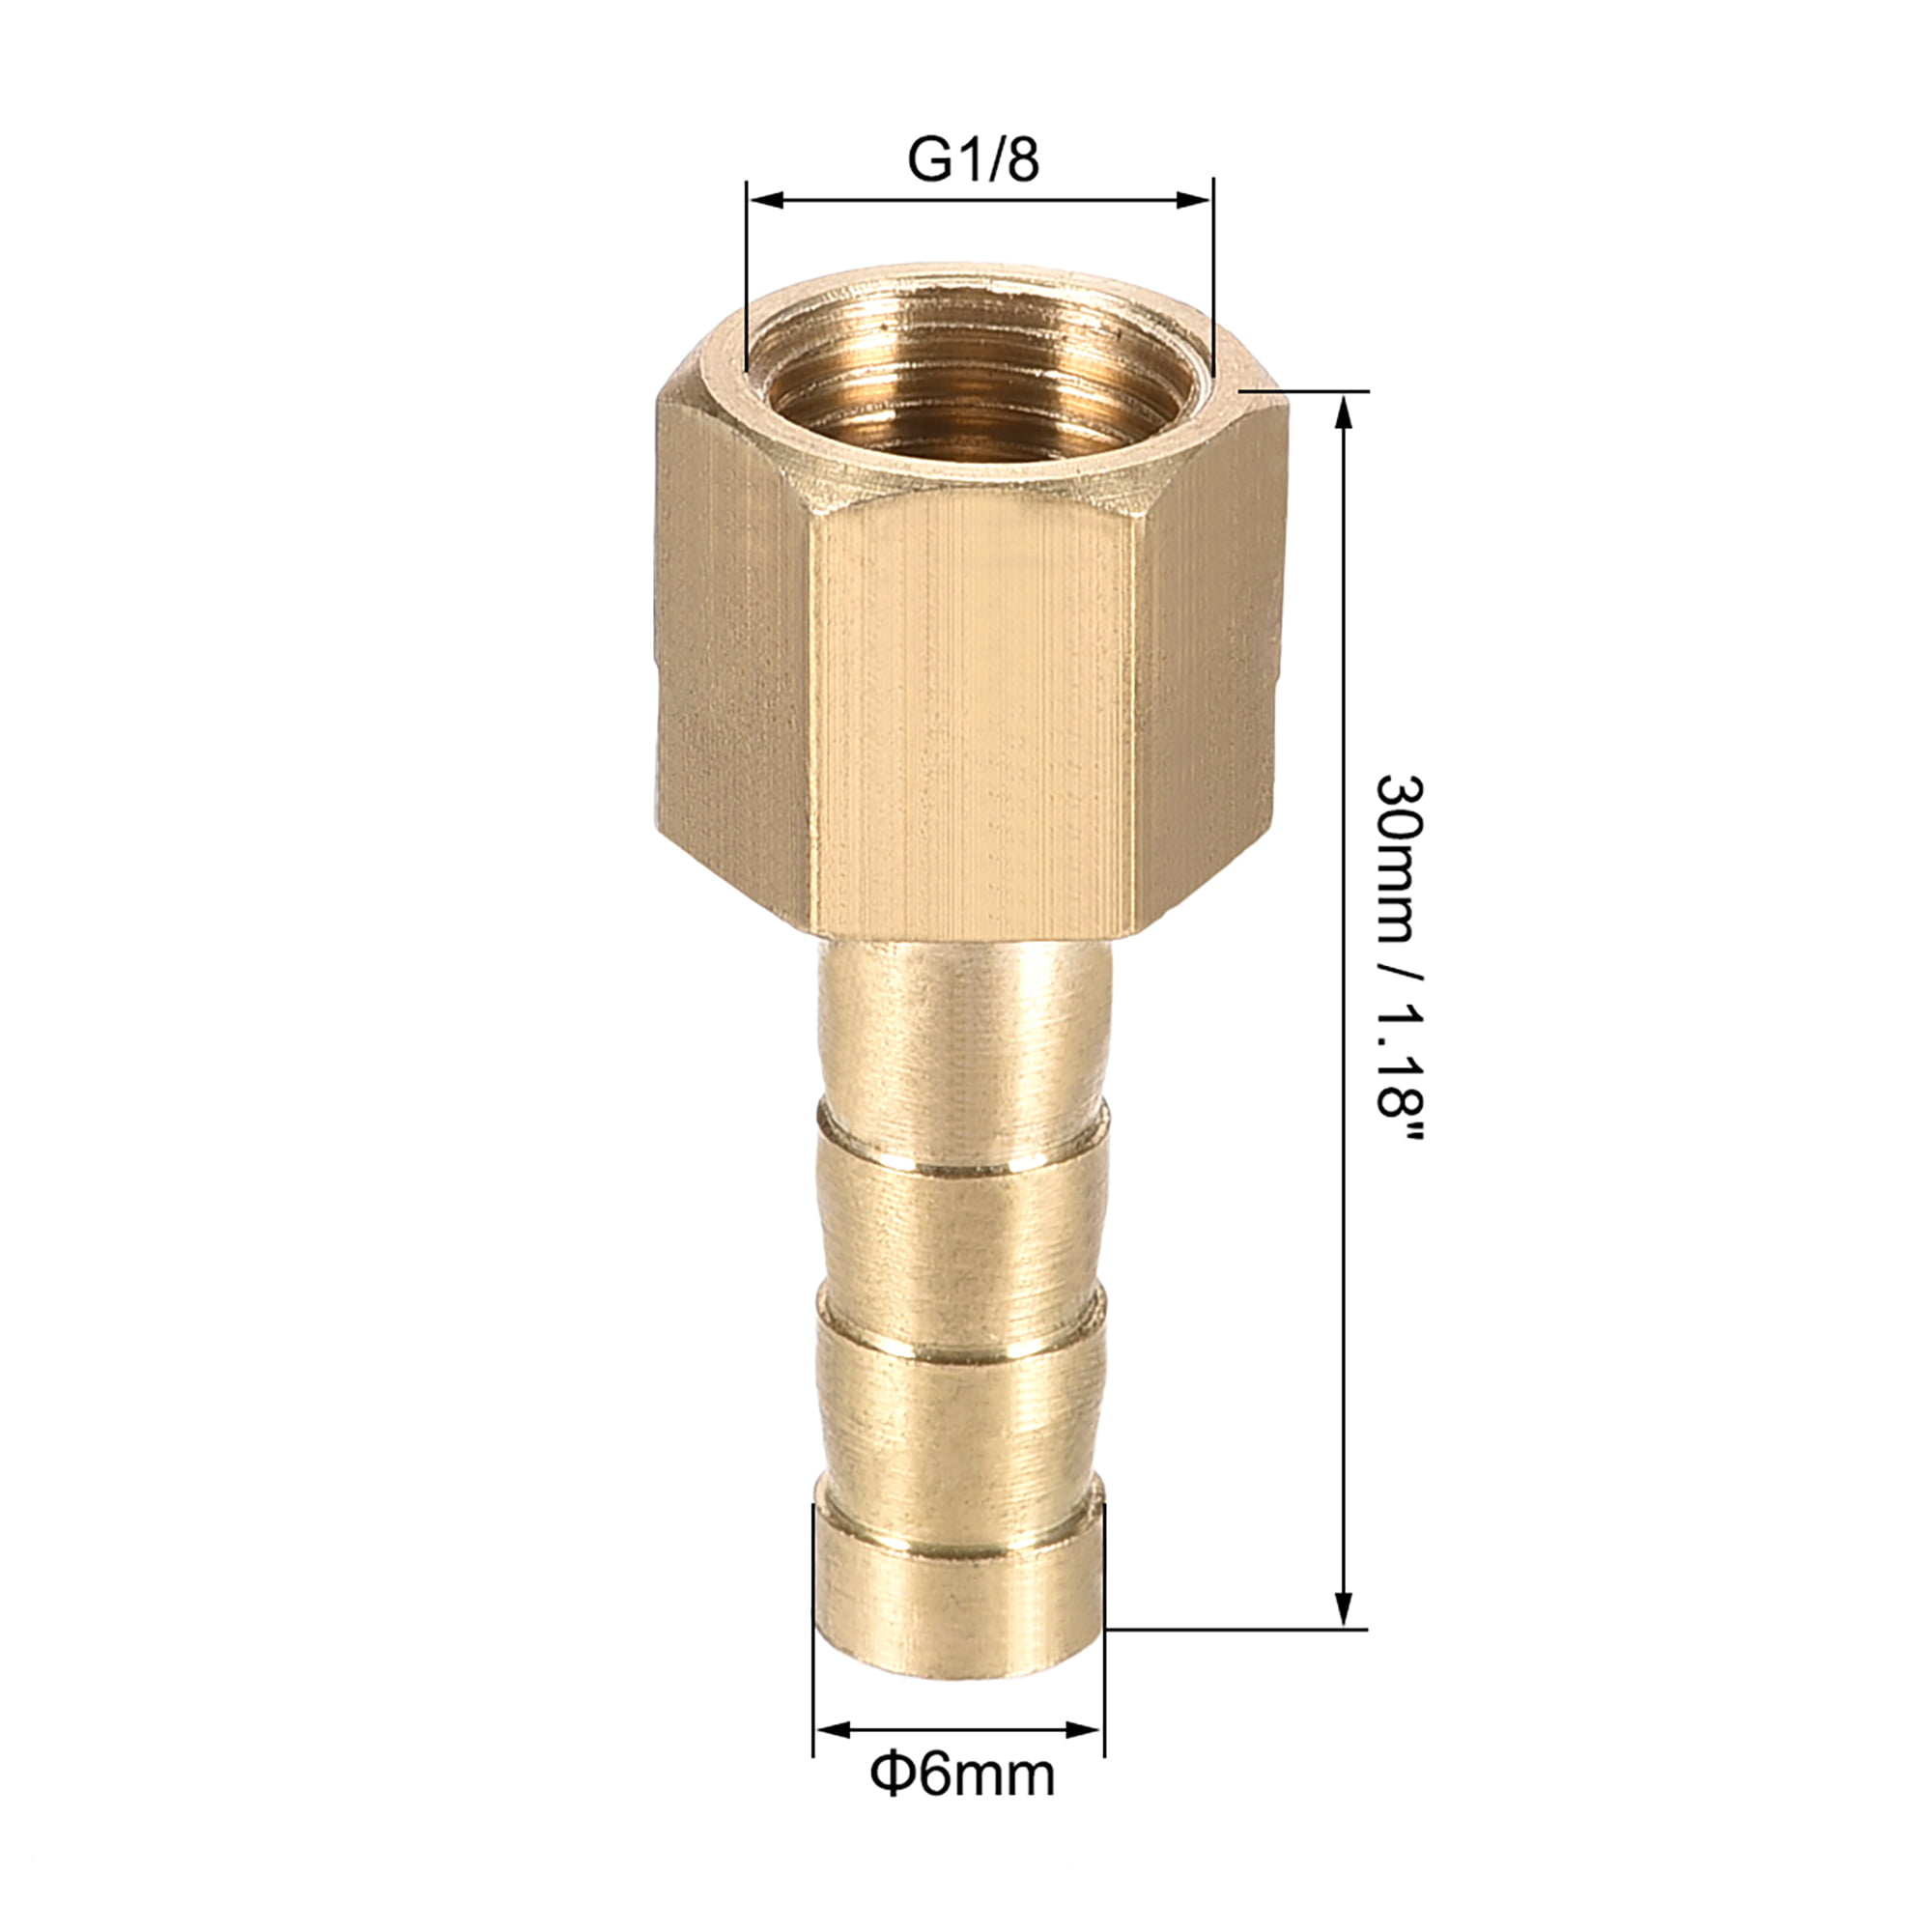 Details about   Brass Barb Hose Fitting Connector Adapter 6mm Barbed x G1/8 Female Pipe 10pcs 